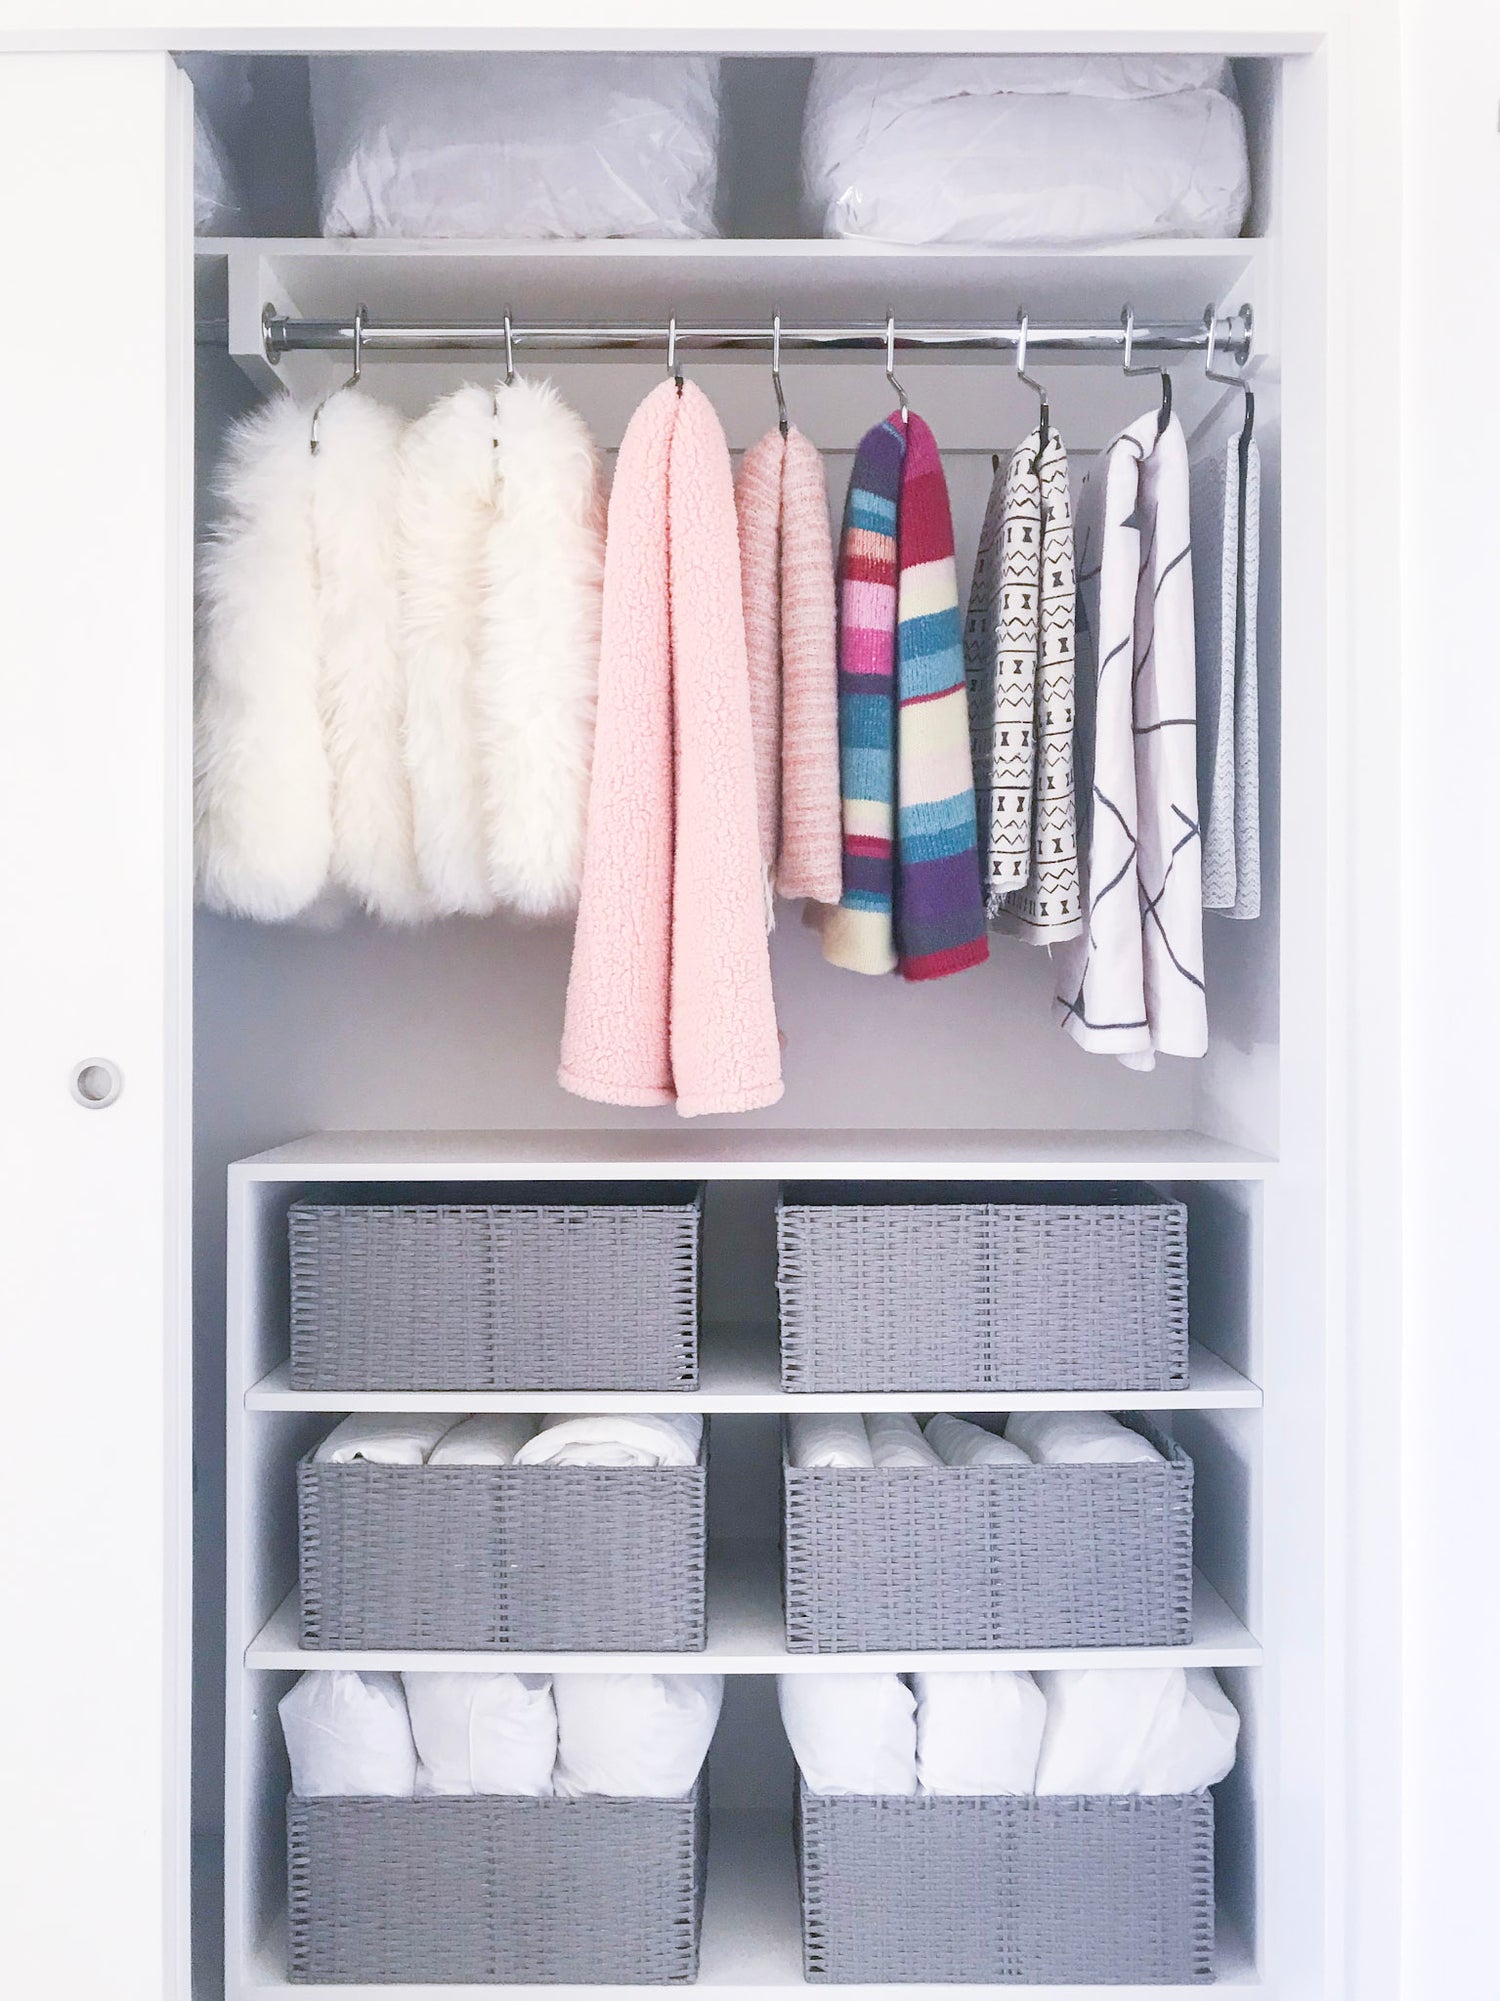 How to Store Your Winter Clothes According to The Home Edit Founders